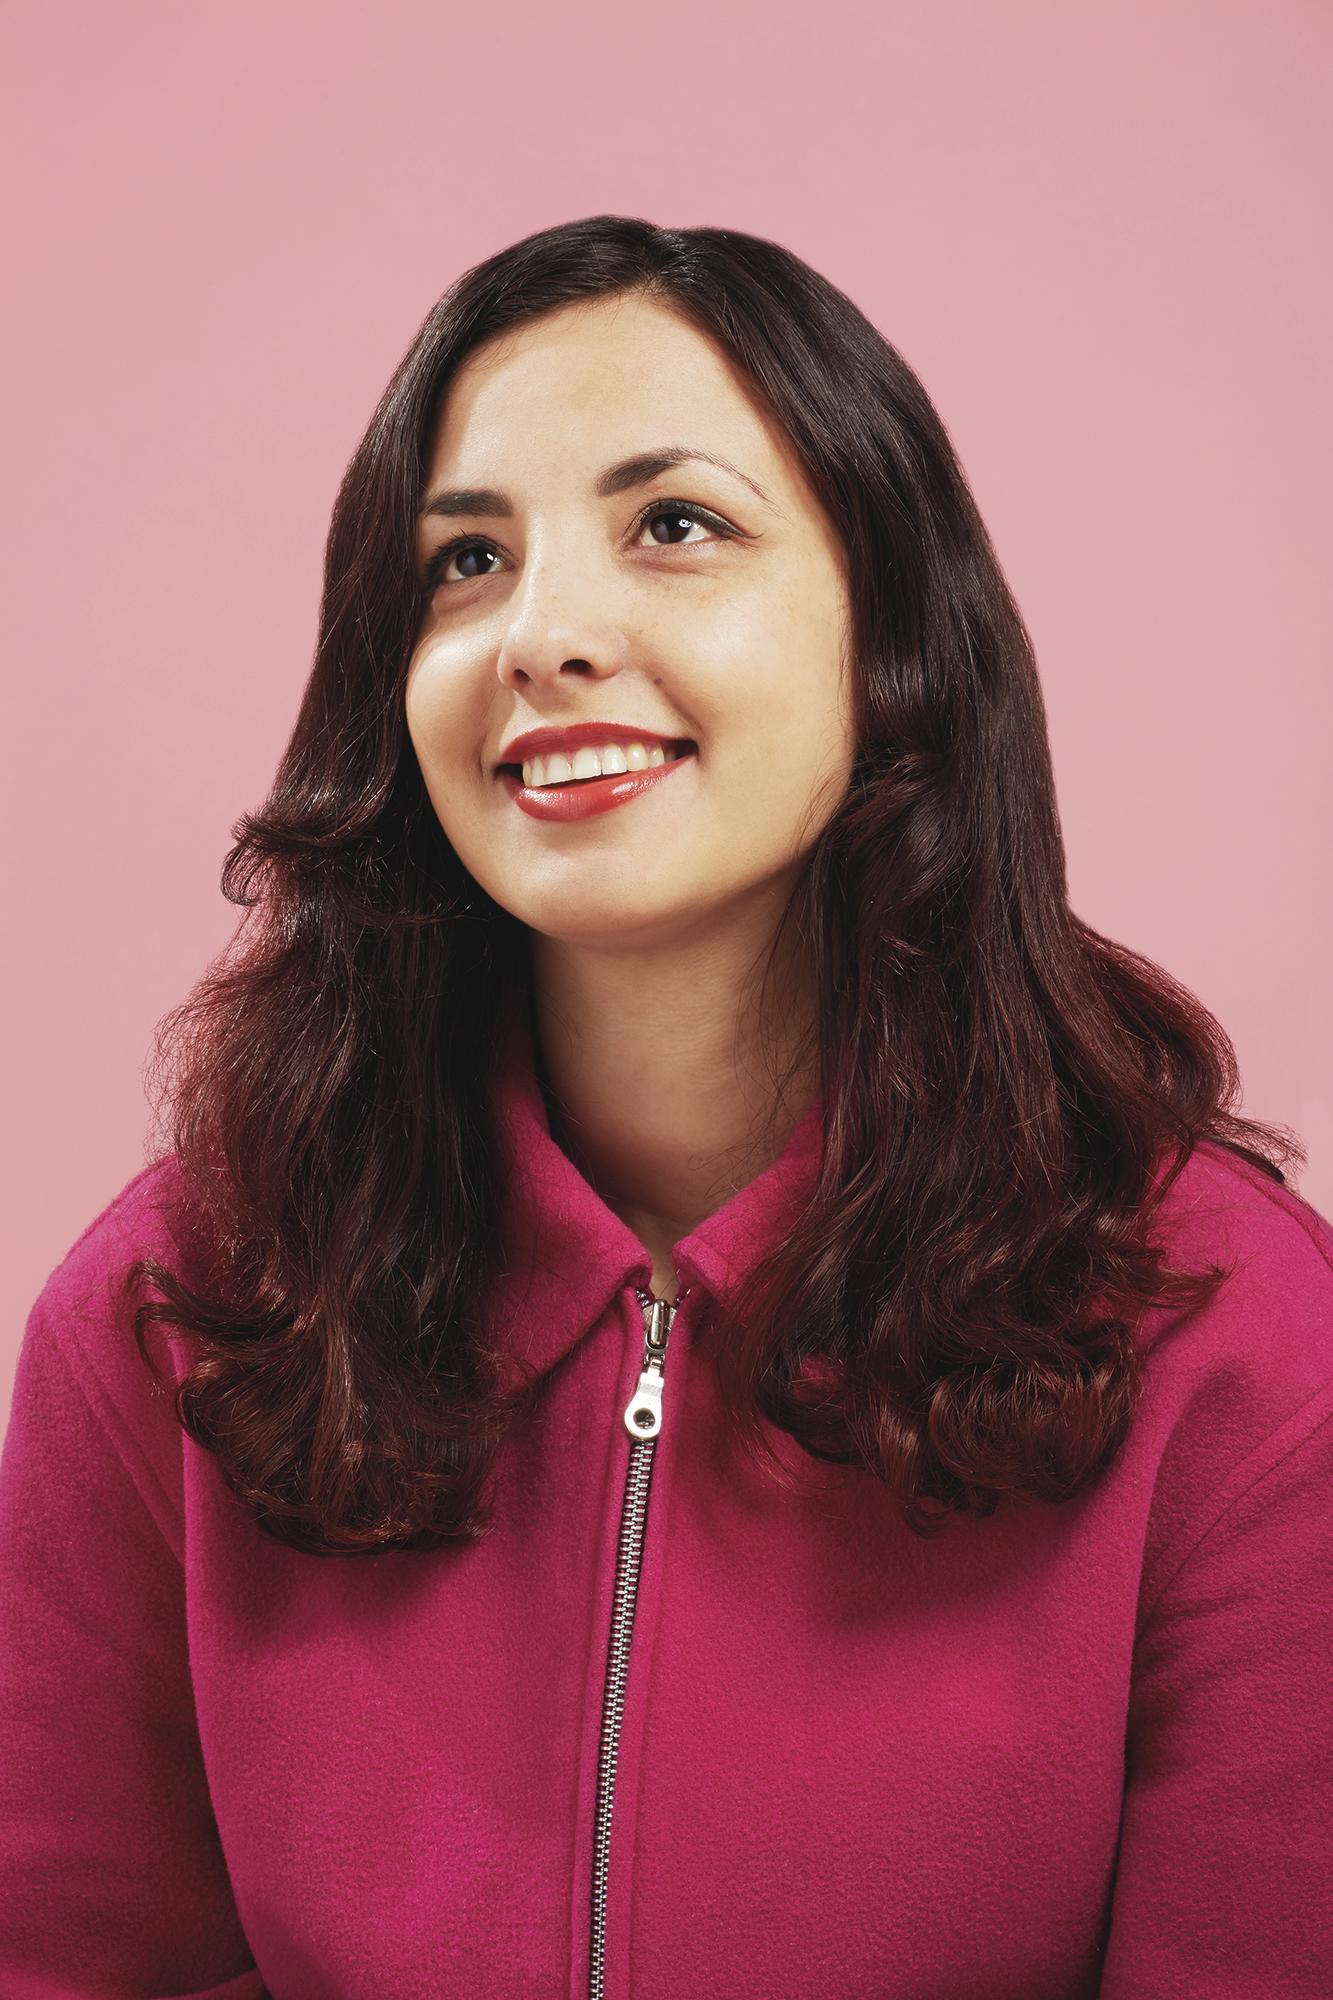 Colour photo headshot of a woman smiling against a pink background